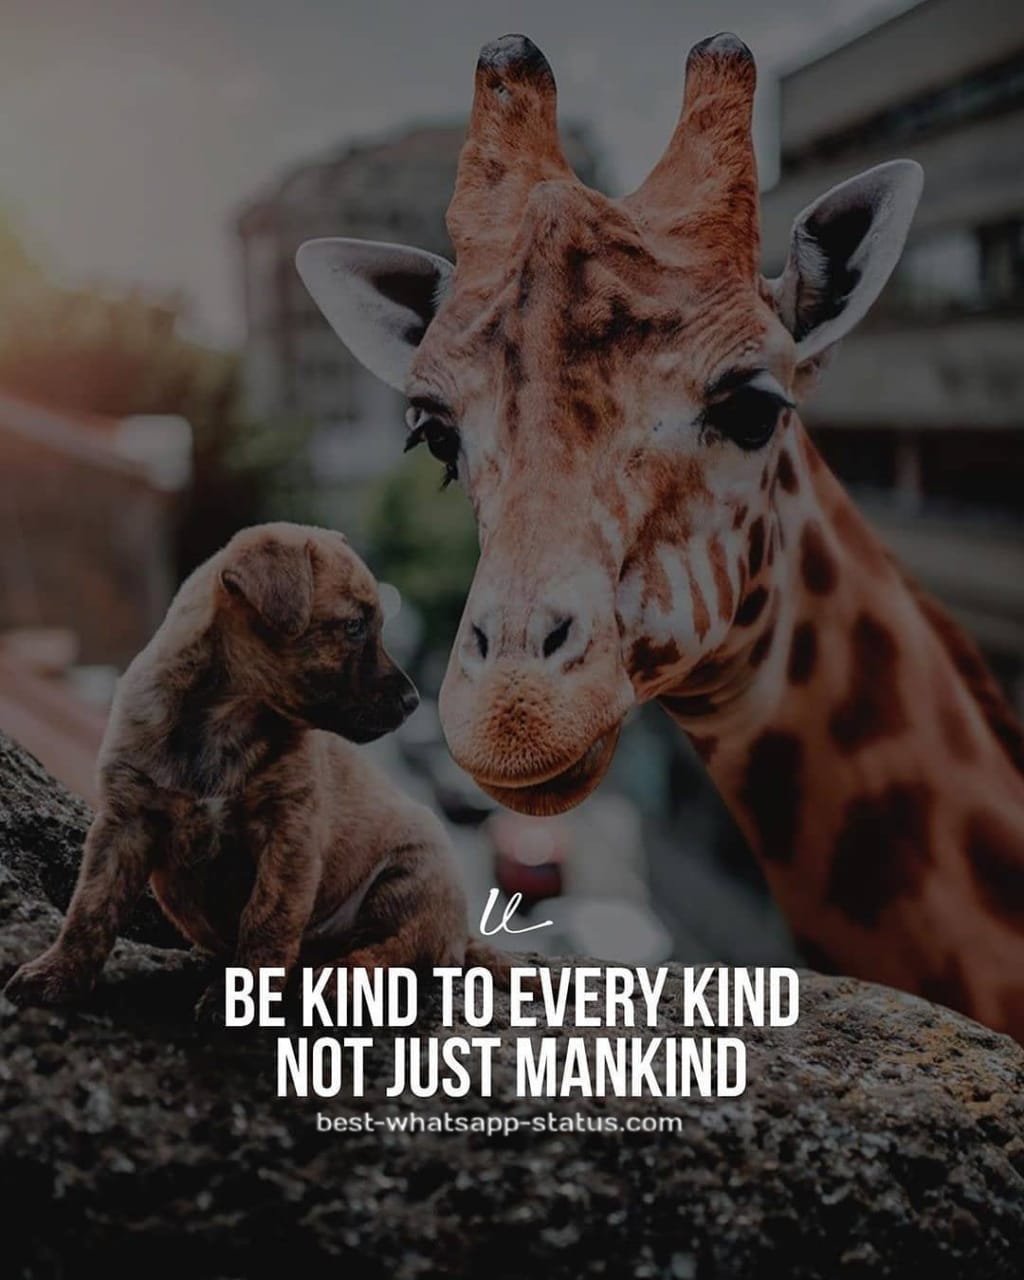 [50]+ Best Animal Lover Quotes That touch your Heart [Status for Animals]